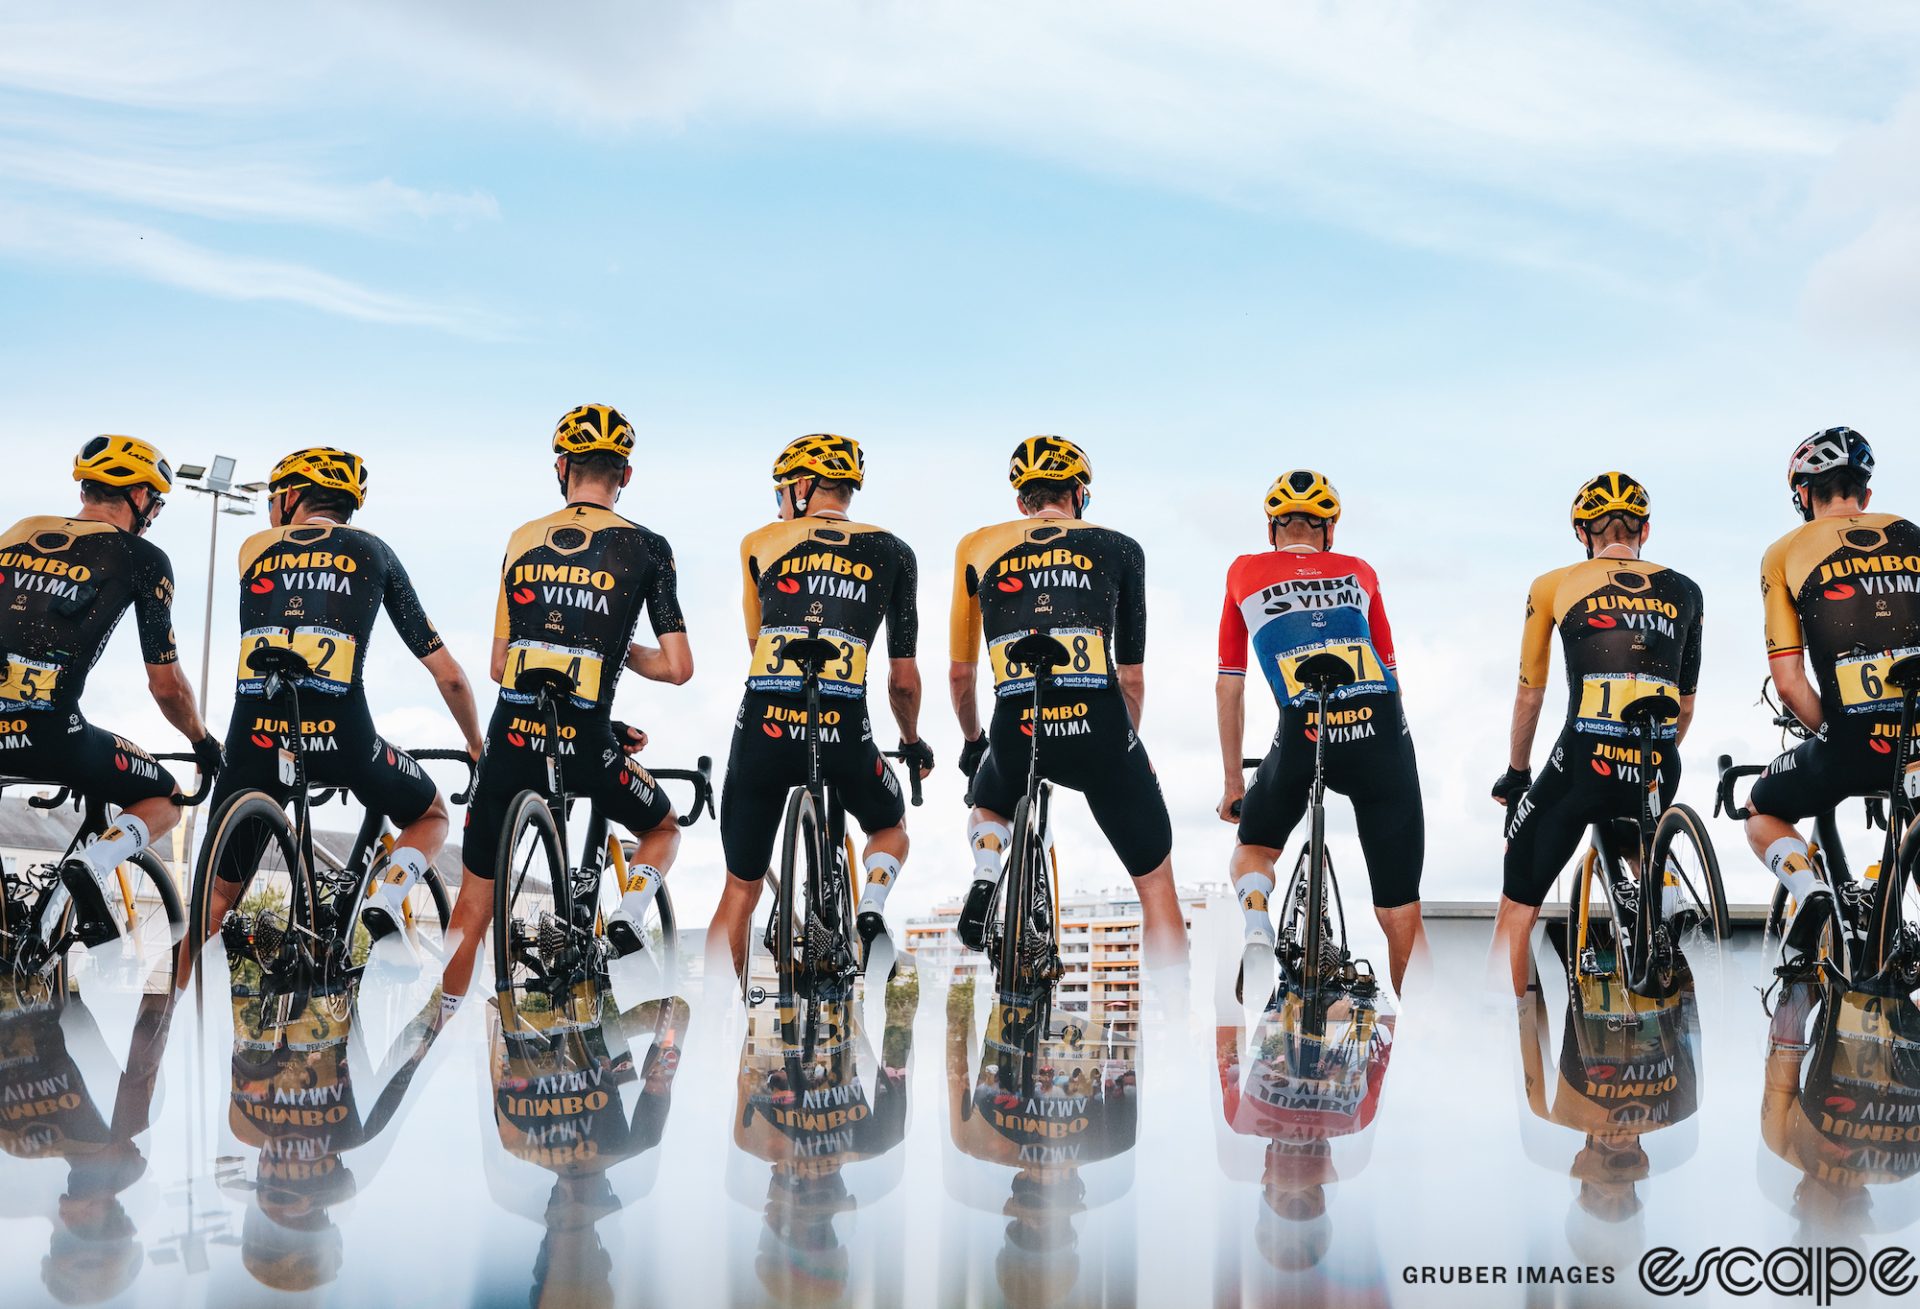 The Jumbo-Visma team attends sign-in at the start of stage 6 of the 2023 Tour de France. Their images are shown in reflection to create a mirror effect.